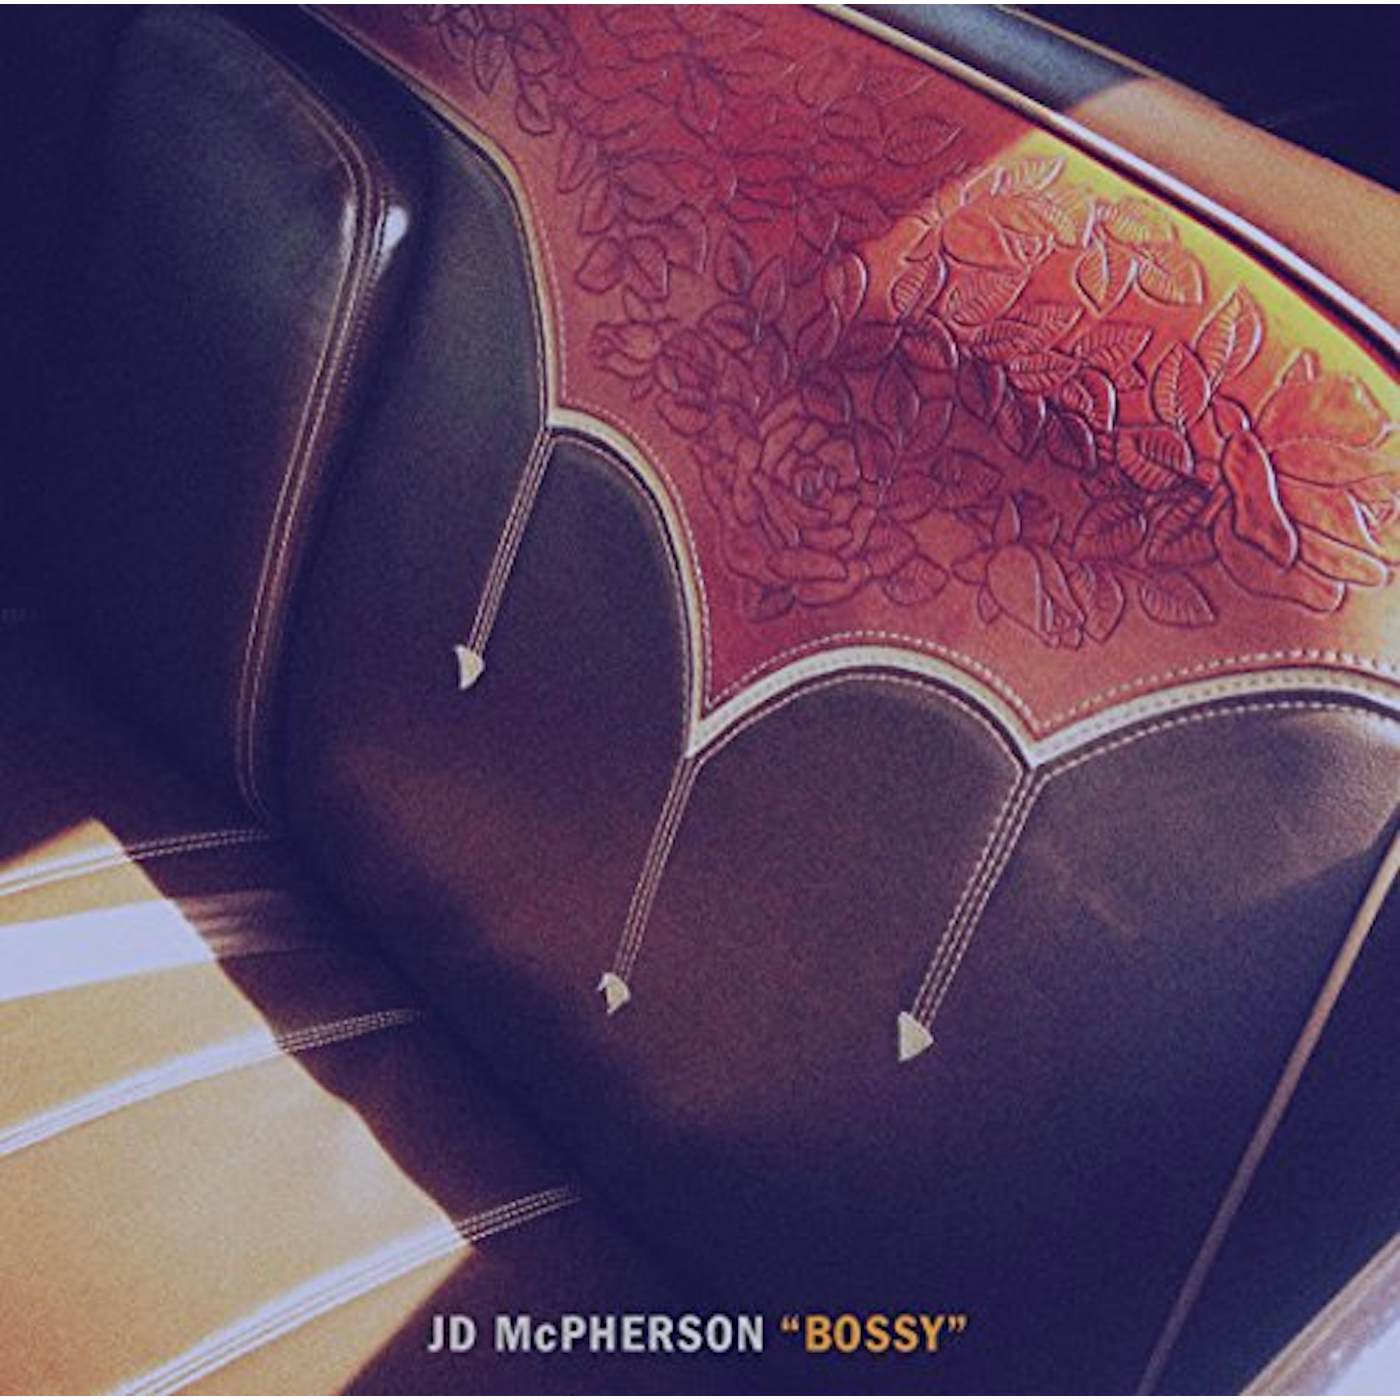 JD McPherson BOSSY / ROME WASN'T BUILT IN A DAY Vinyl Record